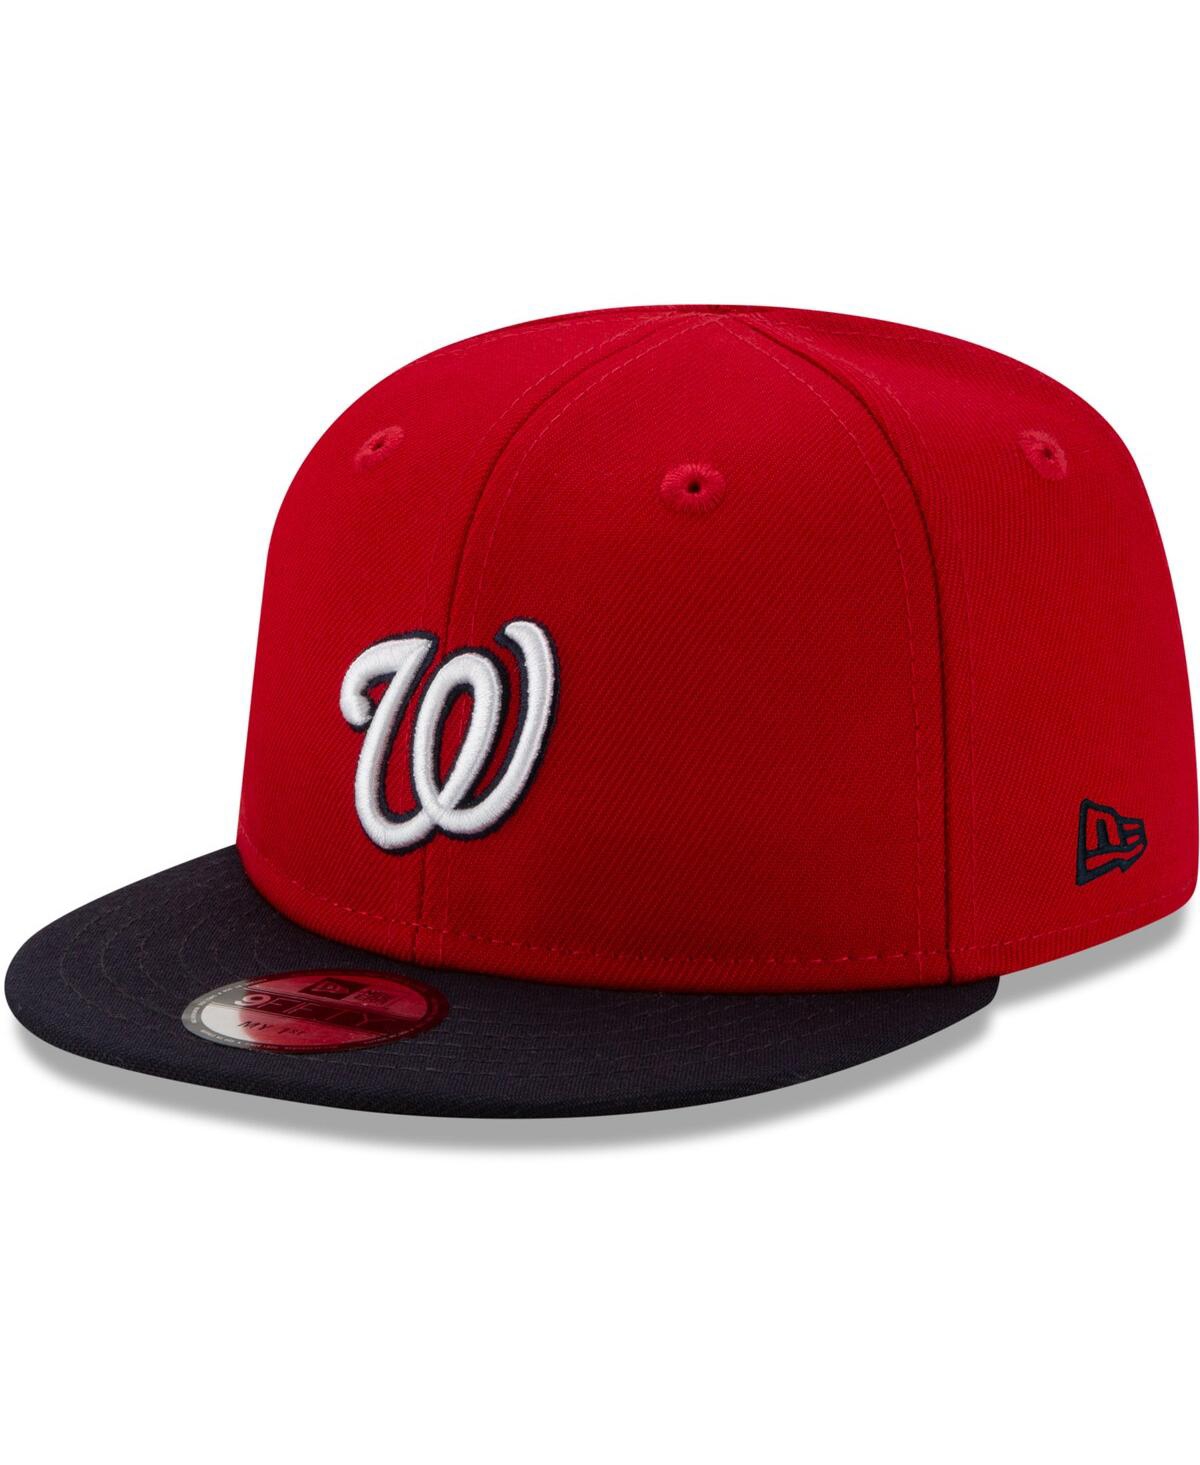 New Era Infant Unisex Red Washington Nationals My First 9fifty Hat